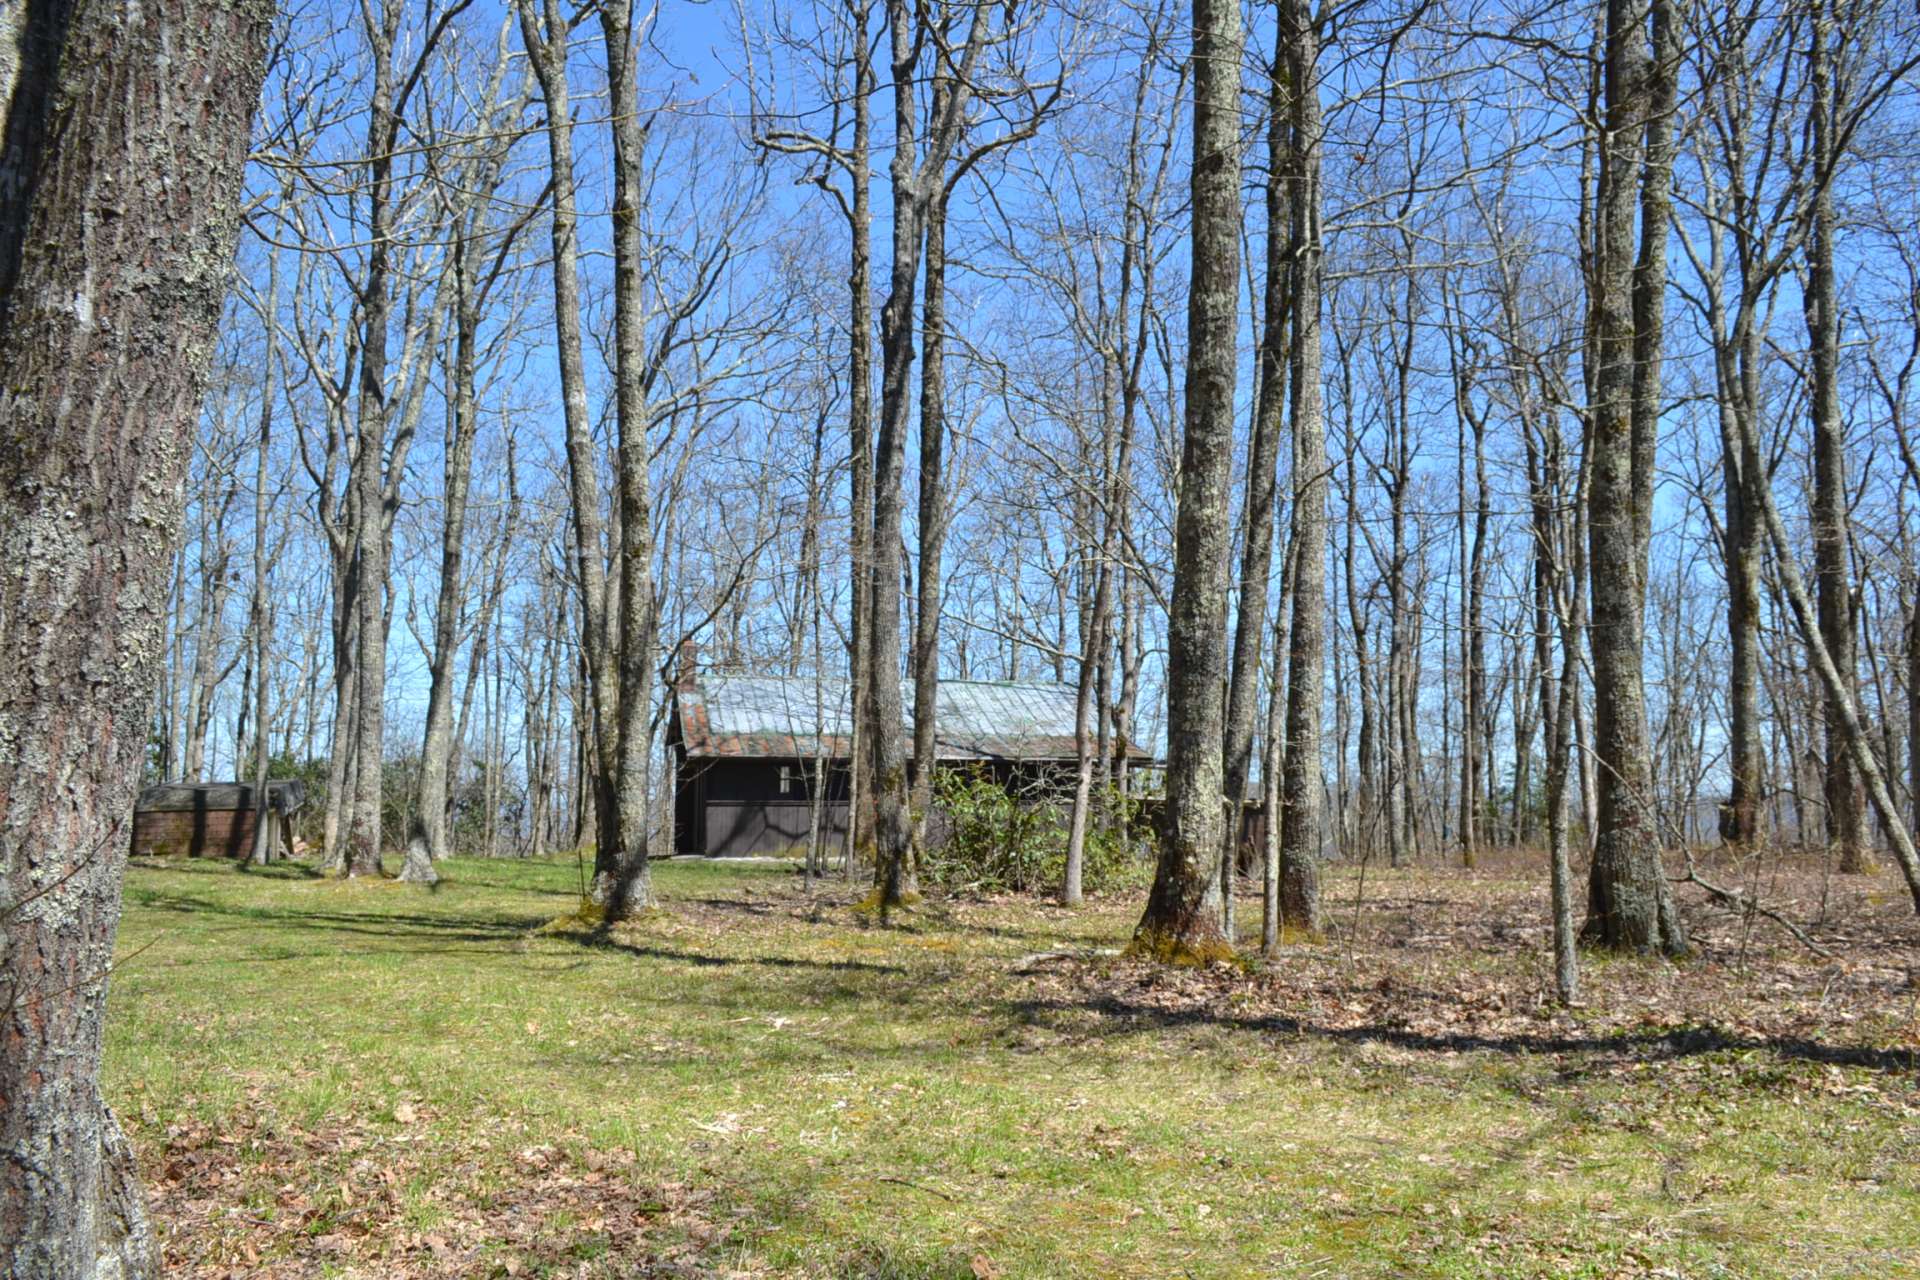 The property offers a small off the grid hunting cabin with  a covered porch to access the main living area.